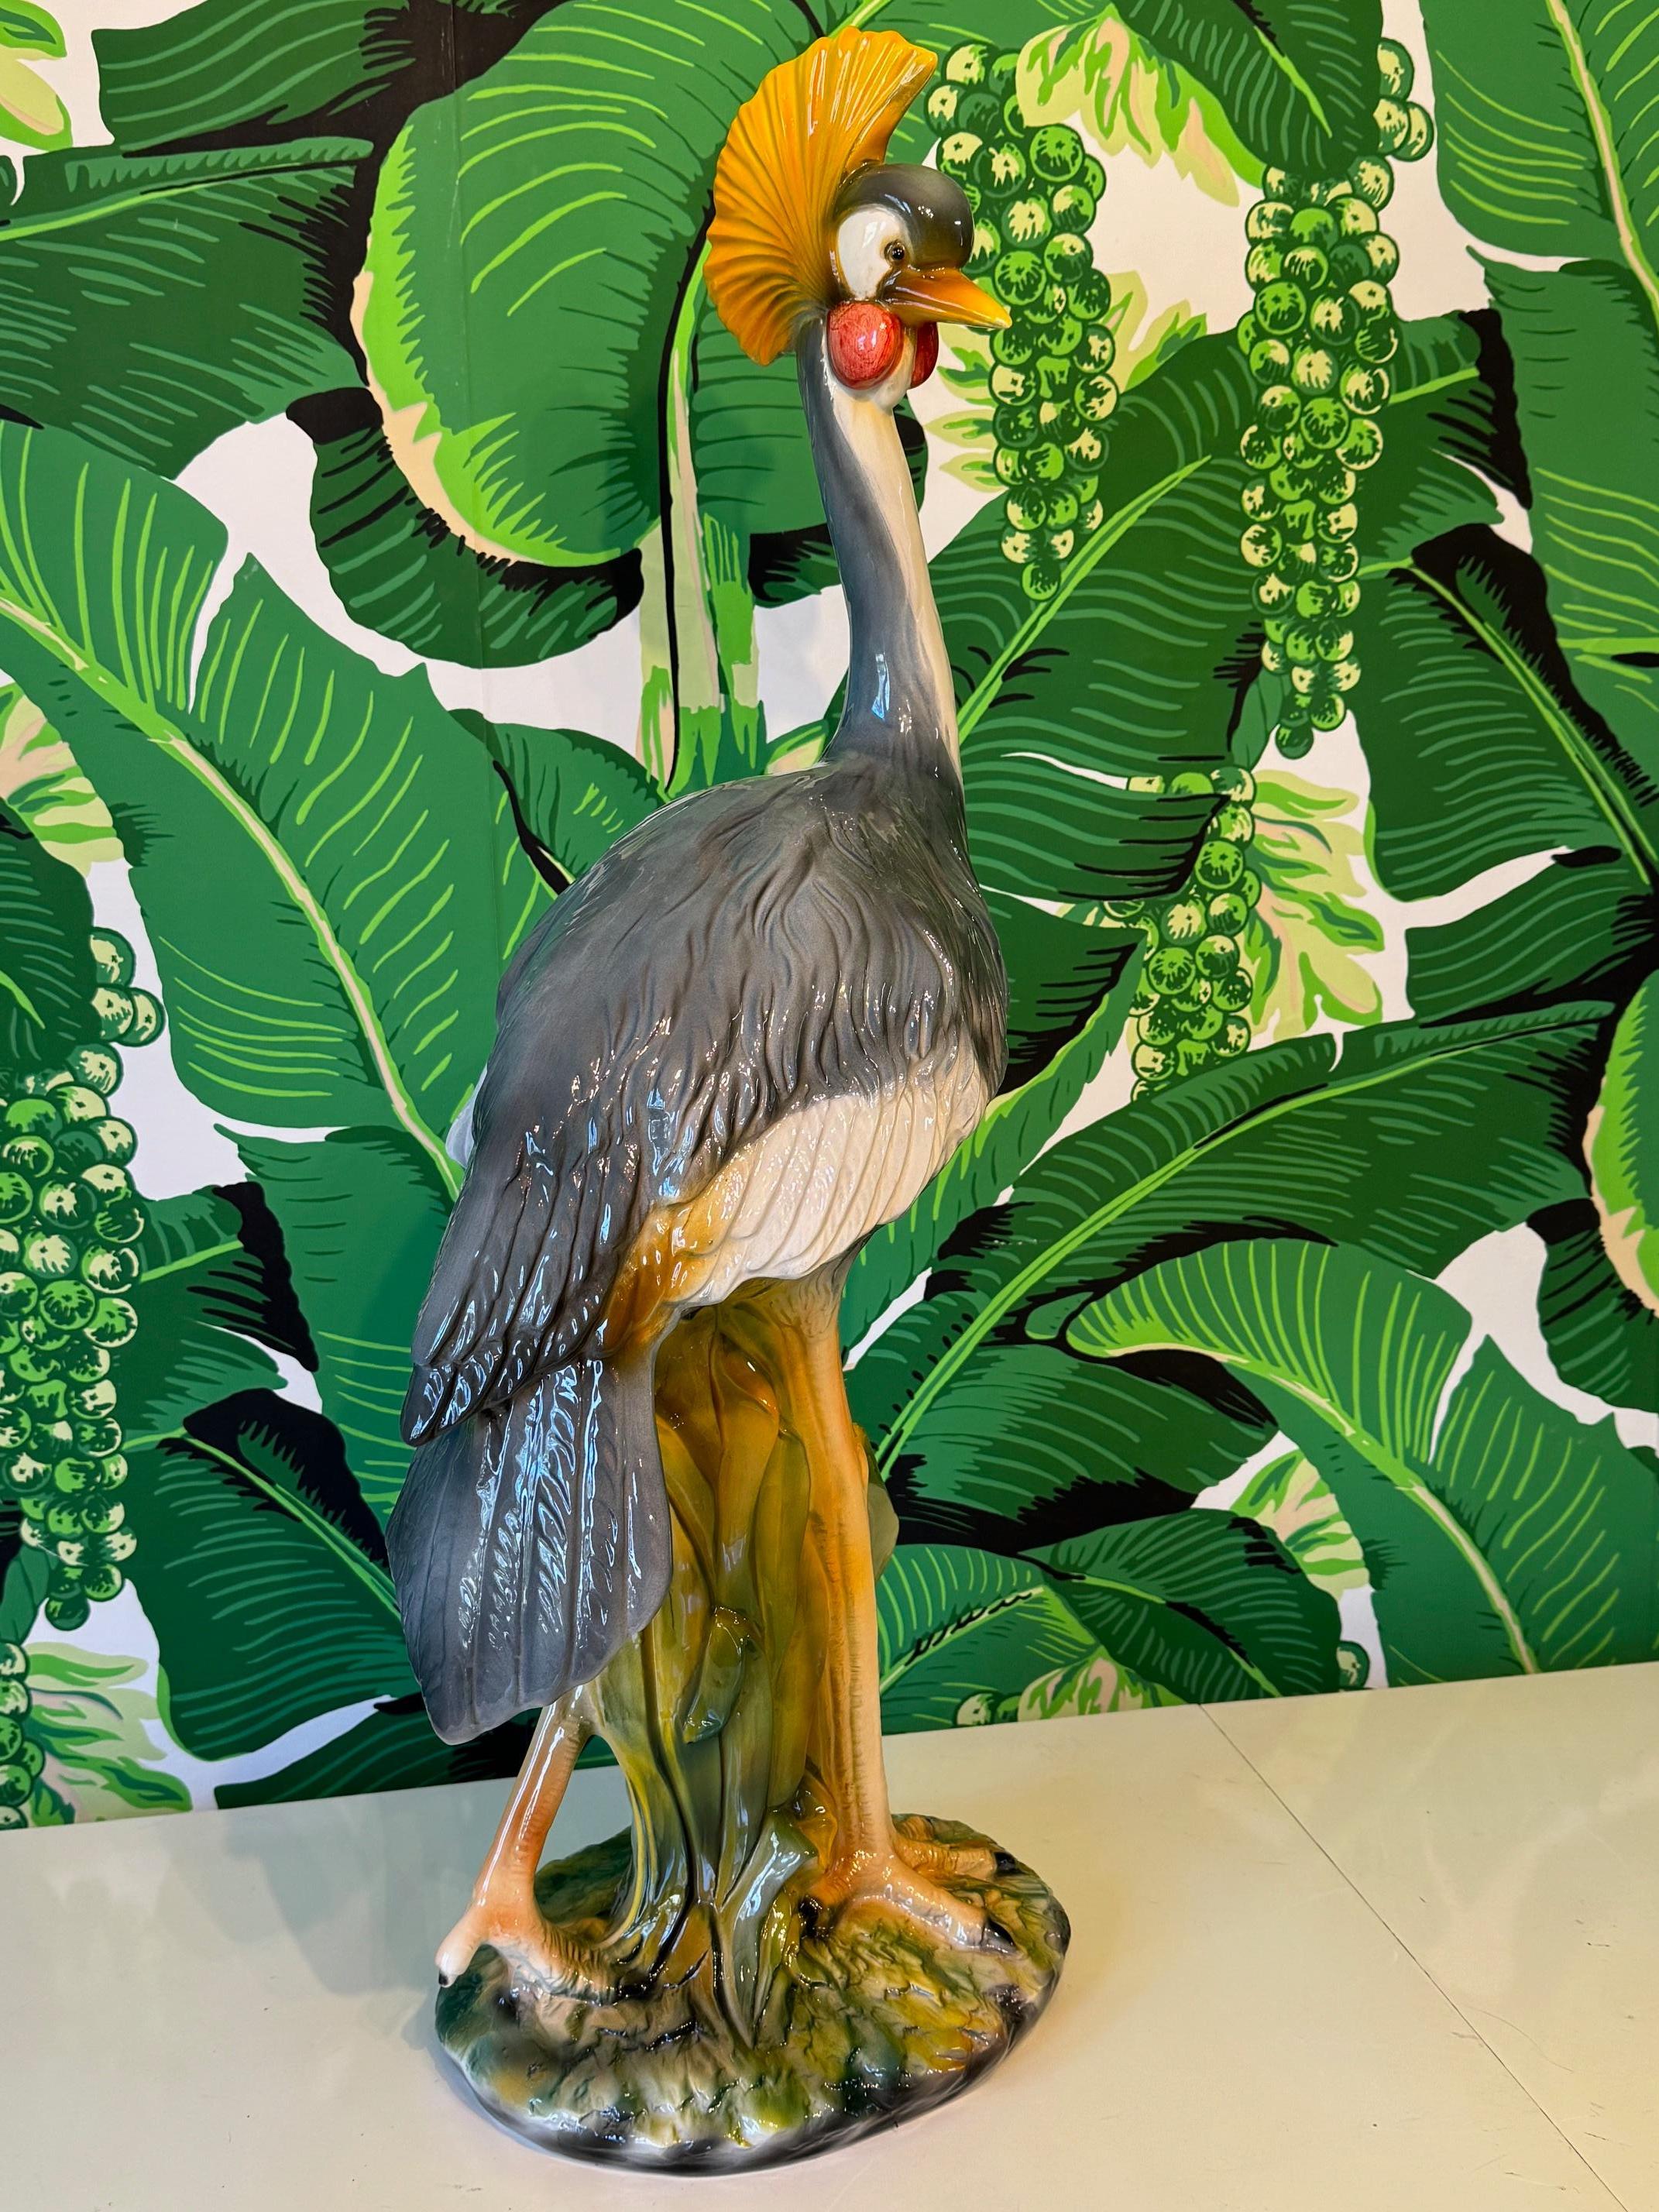 Large ceramic bird statue features life-like hand painted detailing and a high gloss finish. Very good condition with no cracks or chips.
For a shipping quote to your exact zip code, please message us.
